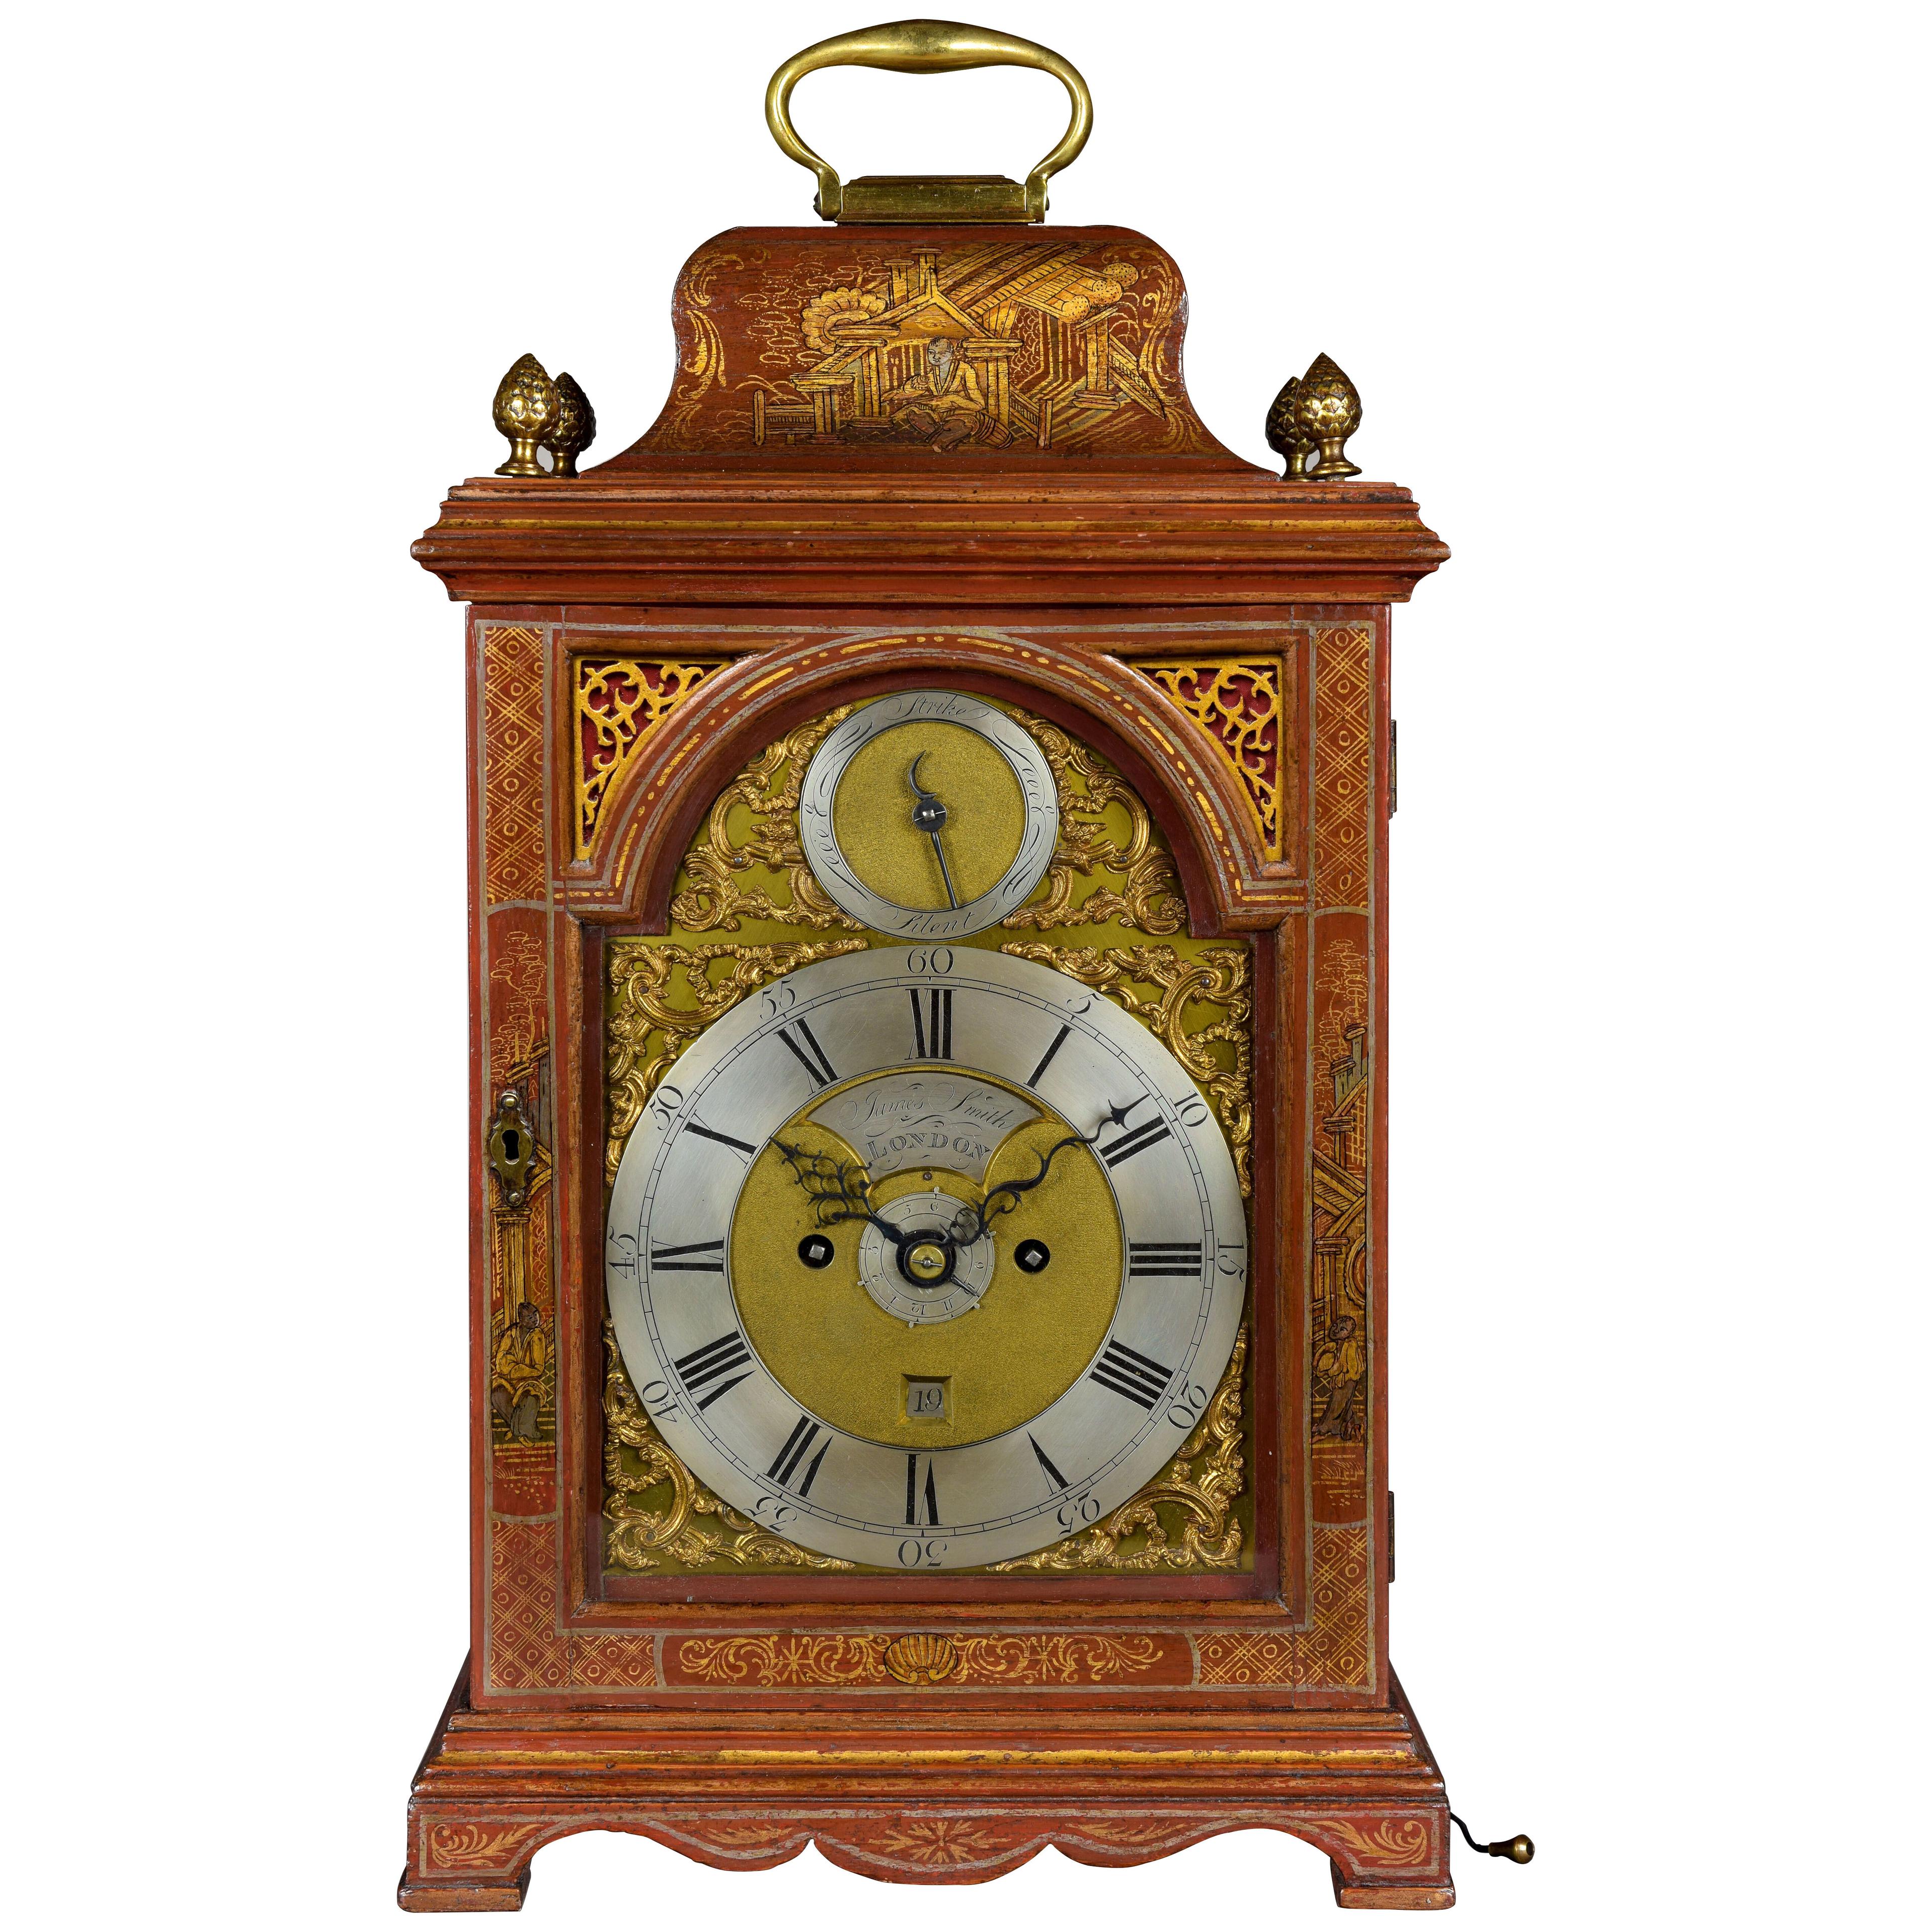 JAMES SMITH, London. A FINE GEORGE III PERIOD RED LACQUER ALARM TABLE CLOCK.